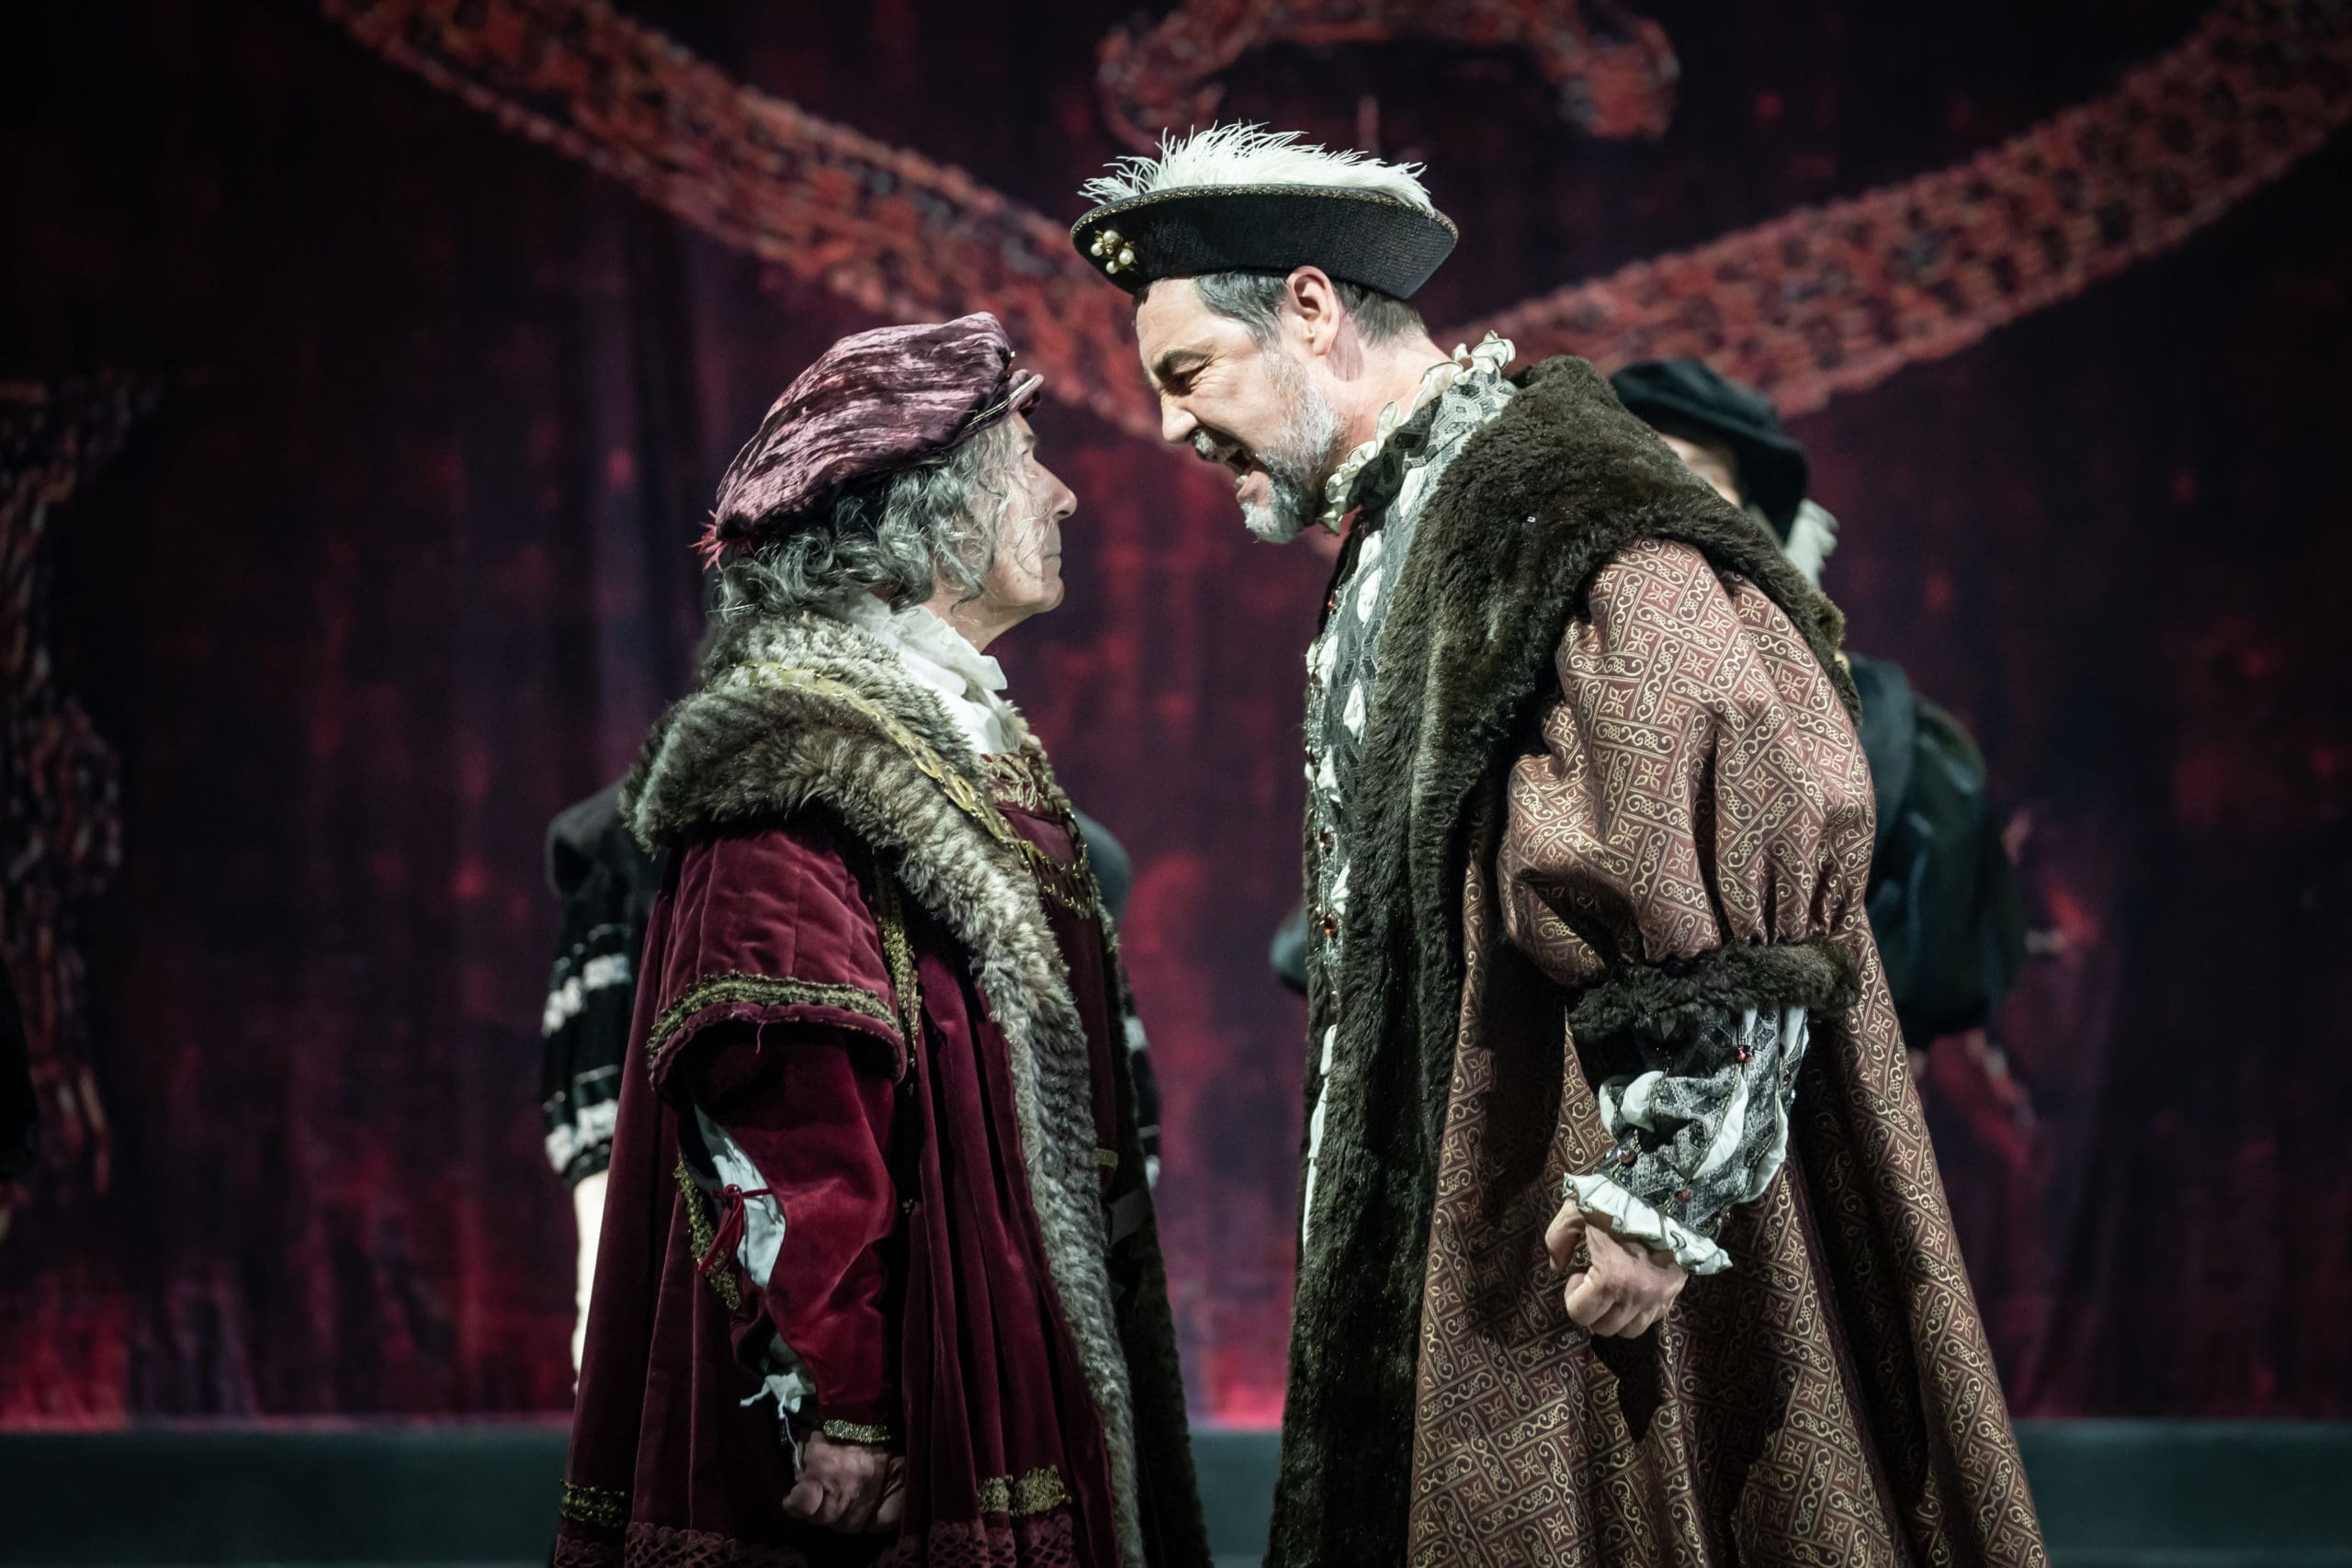 Nicholas Woodeson as Duke of Norfolk and Nathaniel Parker as Henry VIII in The Mirror and the Light - Photo by Marc Brenner